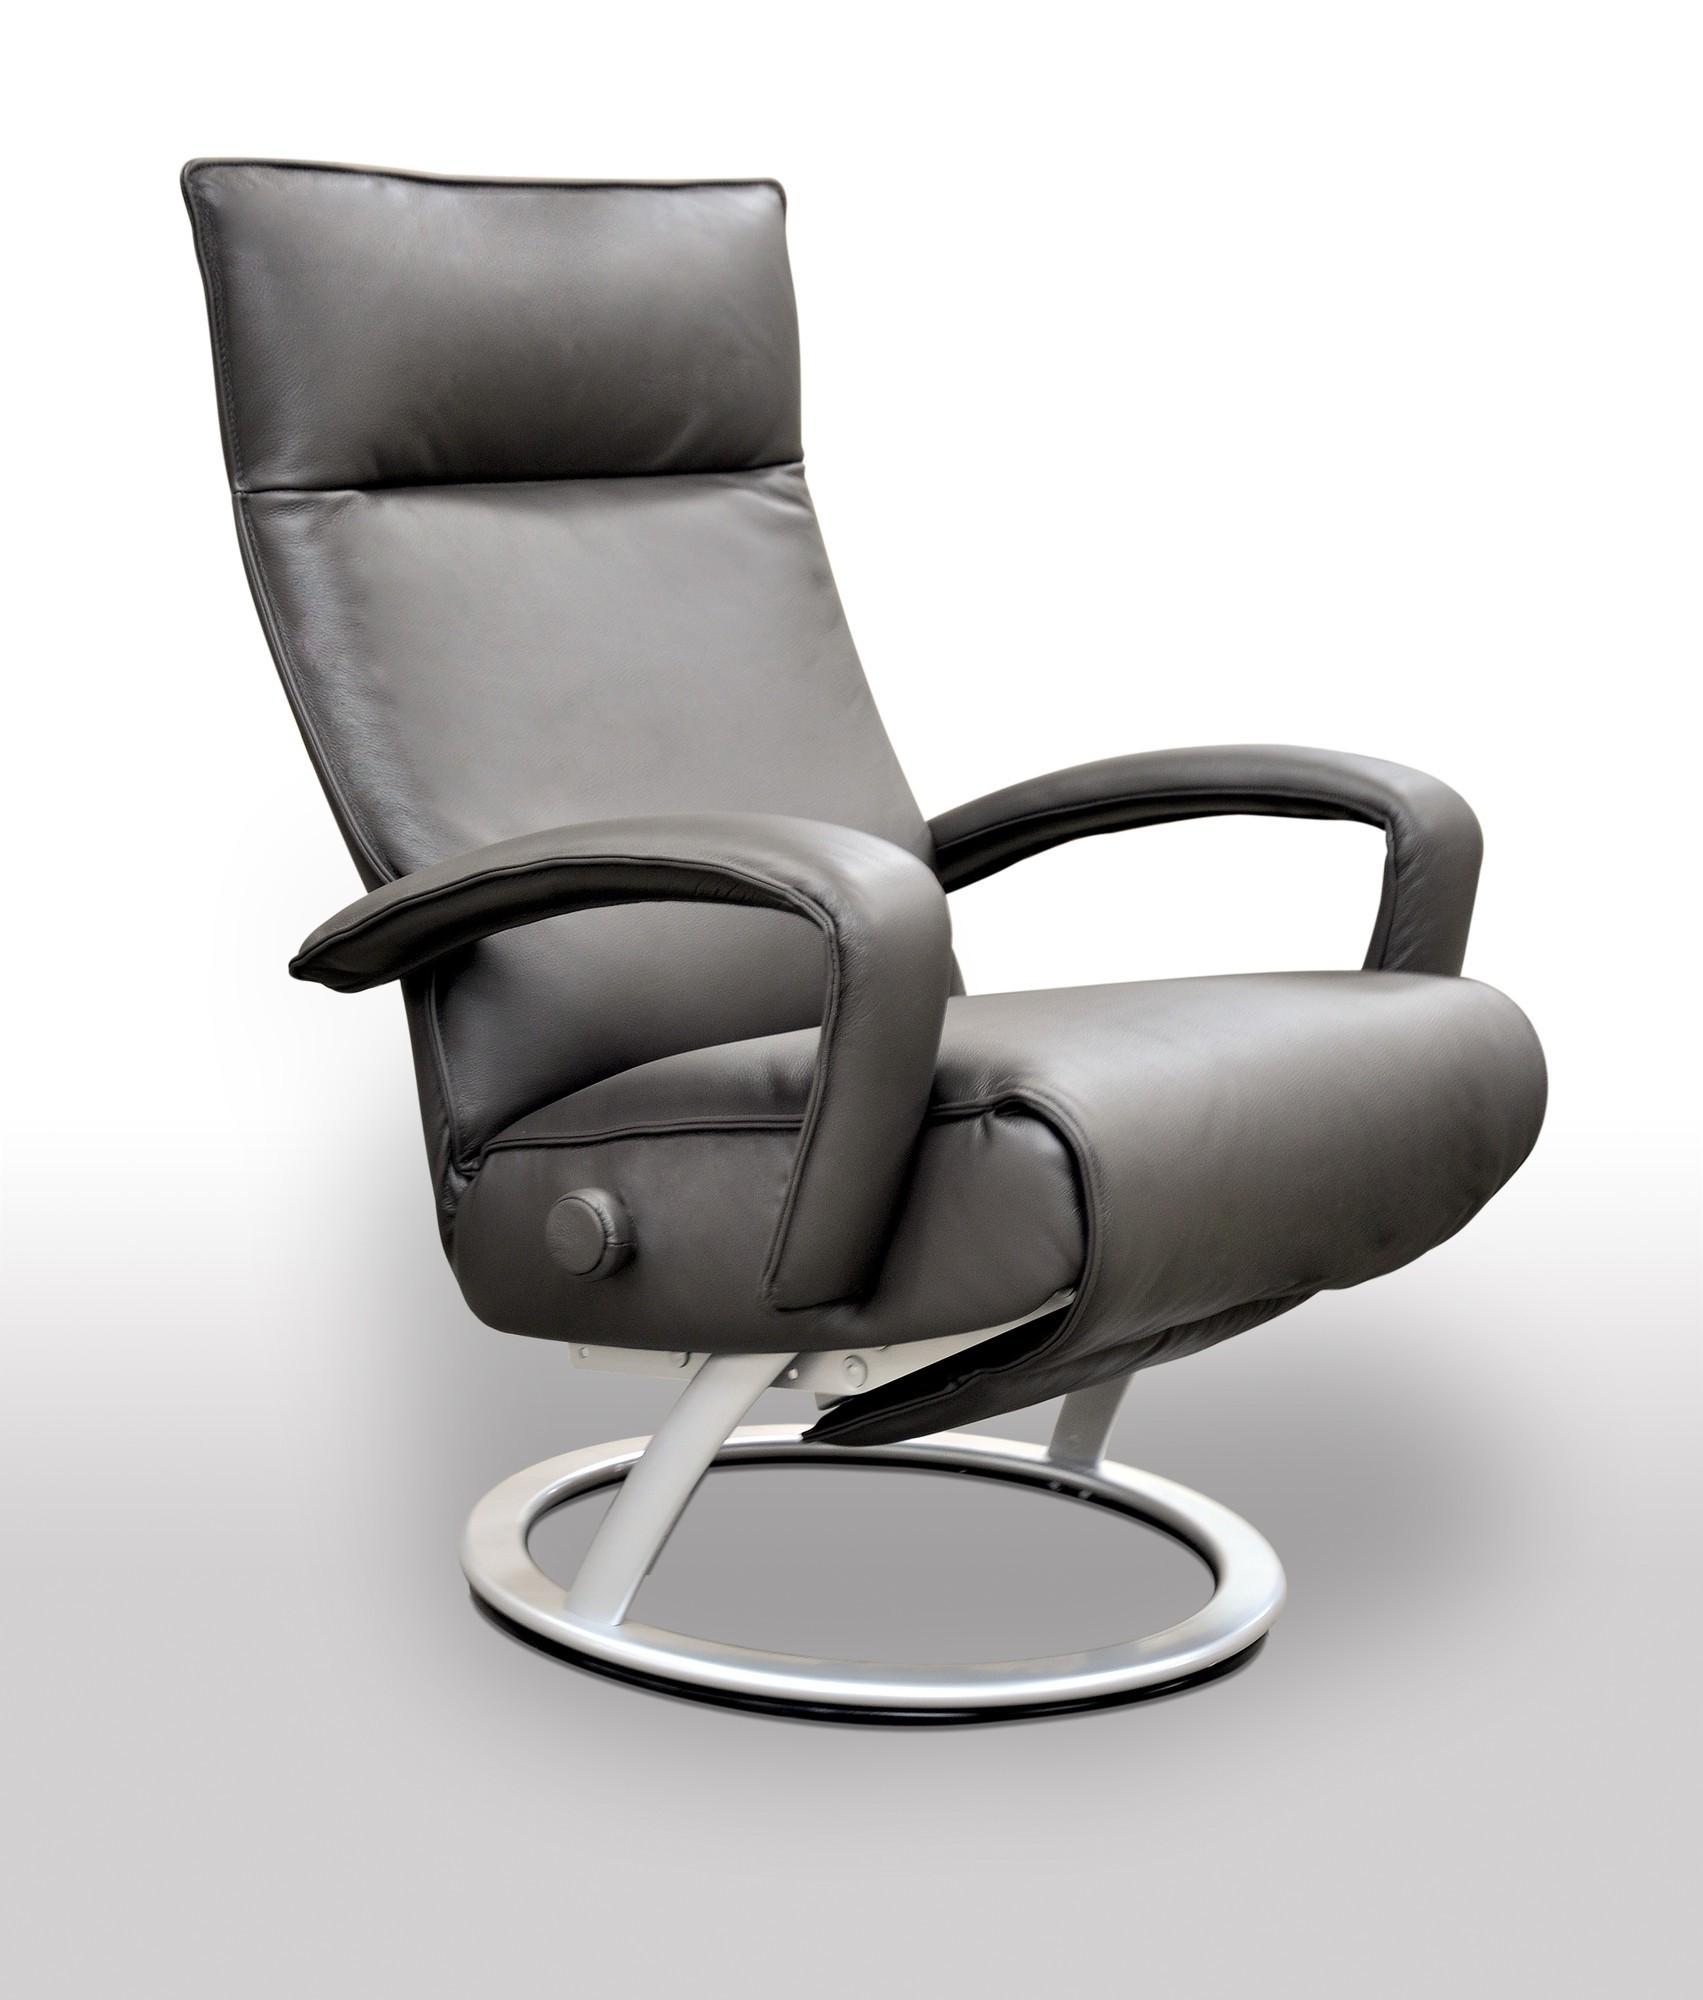 Contemporary reclining chairs